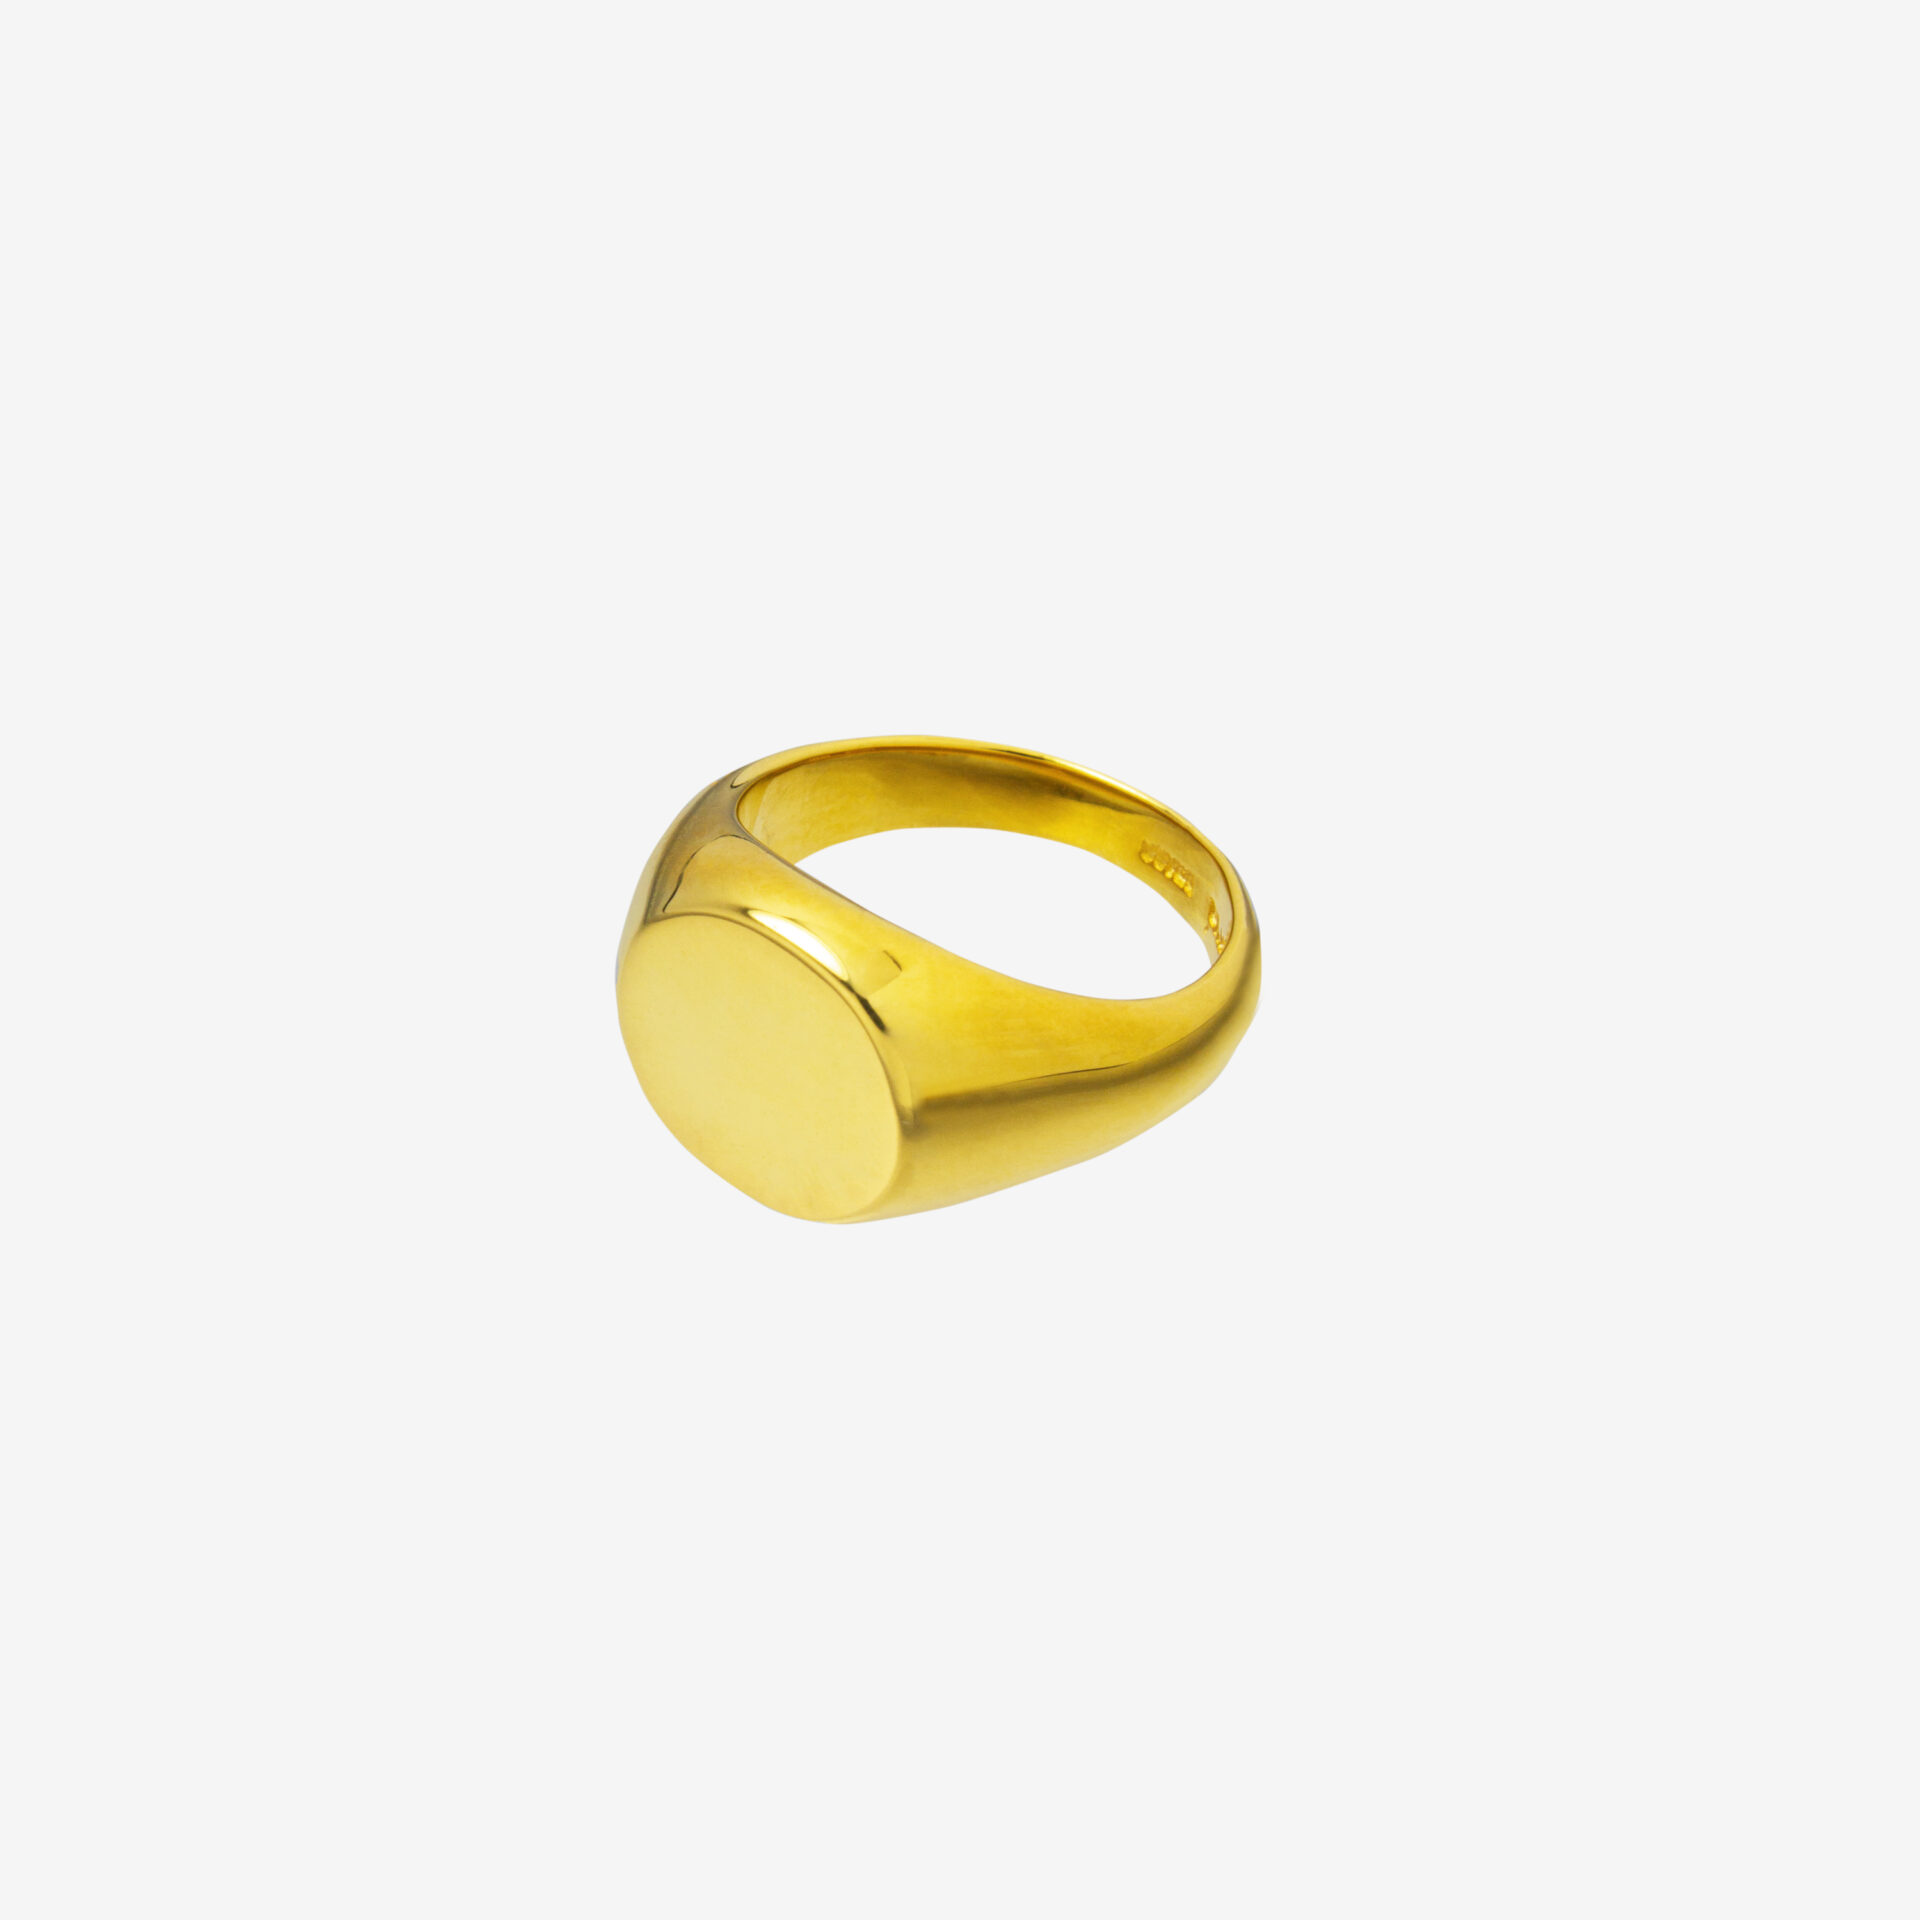 https://brua.com.ua/shop/rounded-signet-silver-plated-yellow-gold/